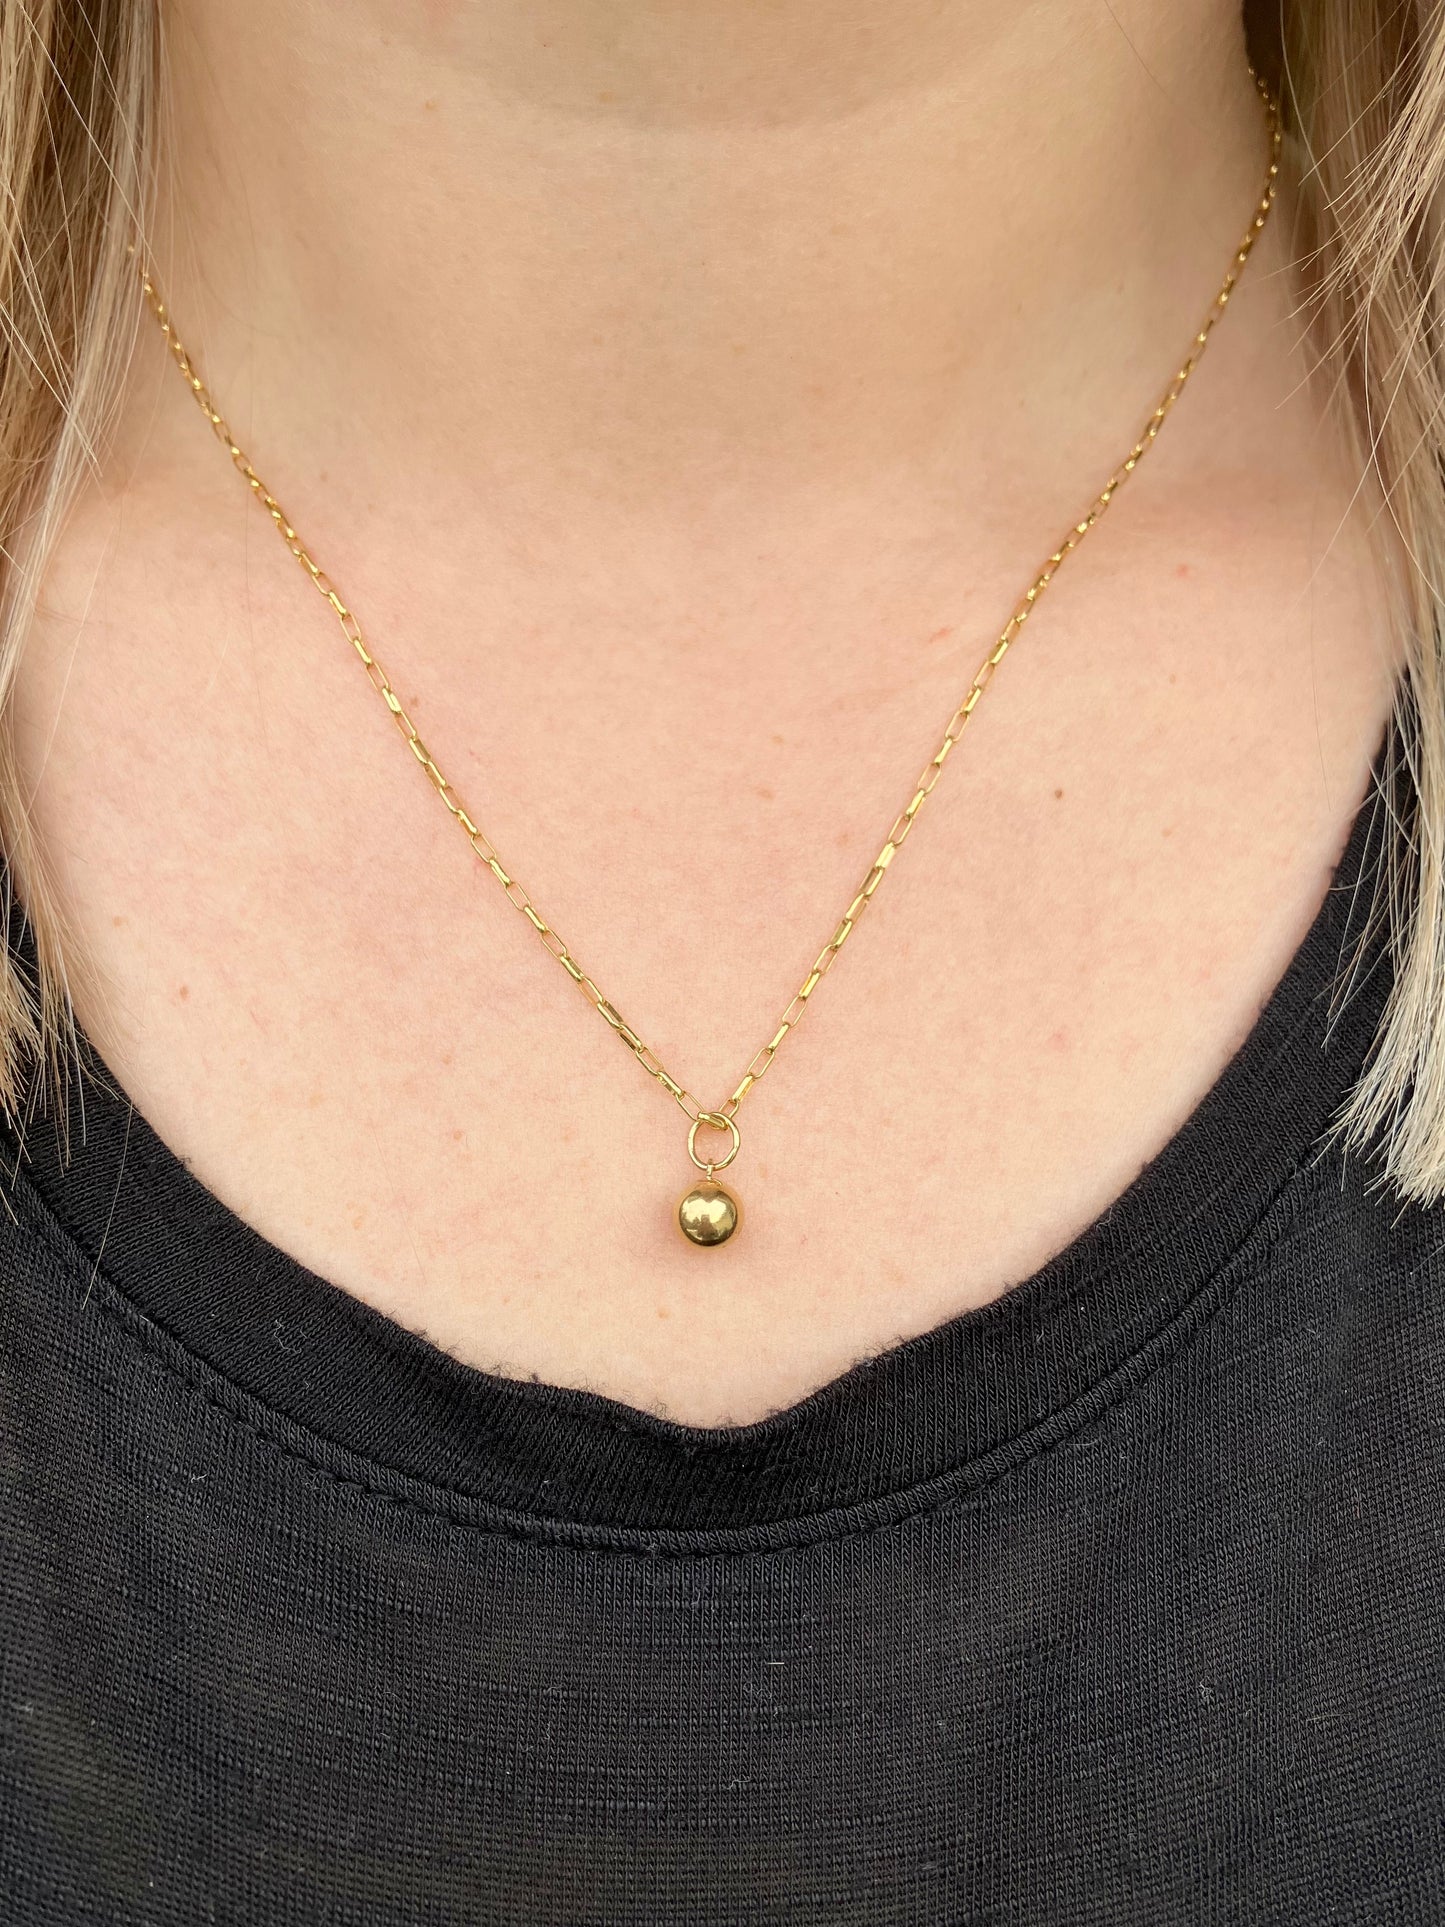 Gold Filled Charm Ball Necklace